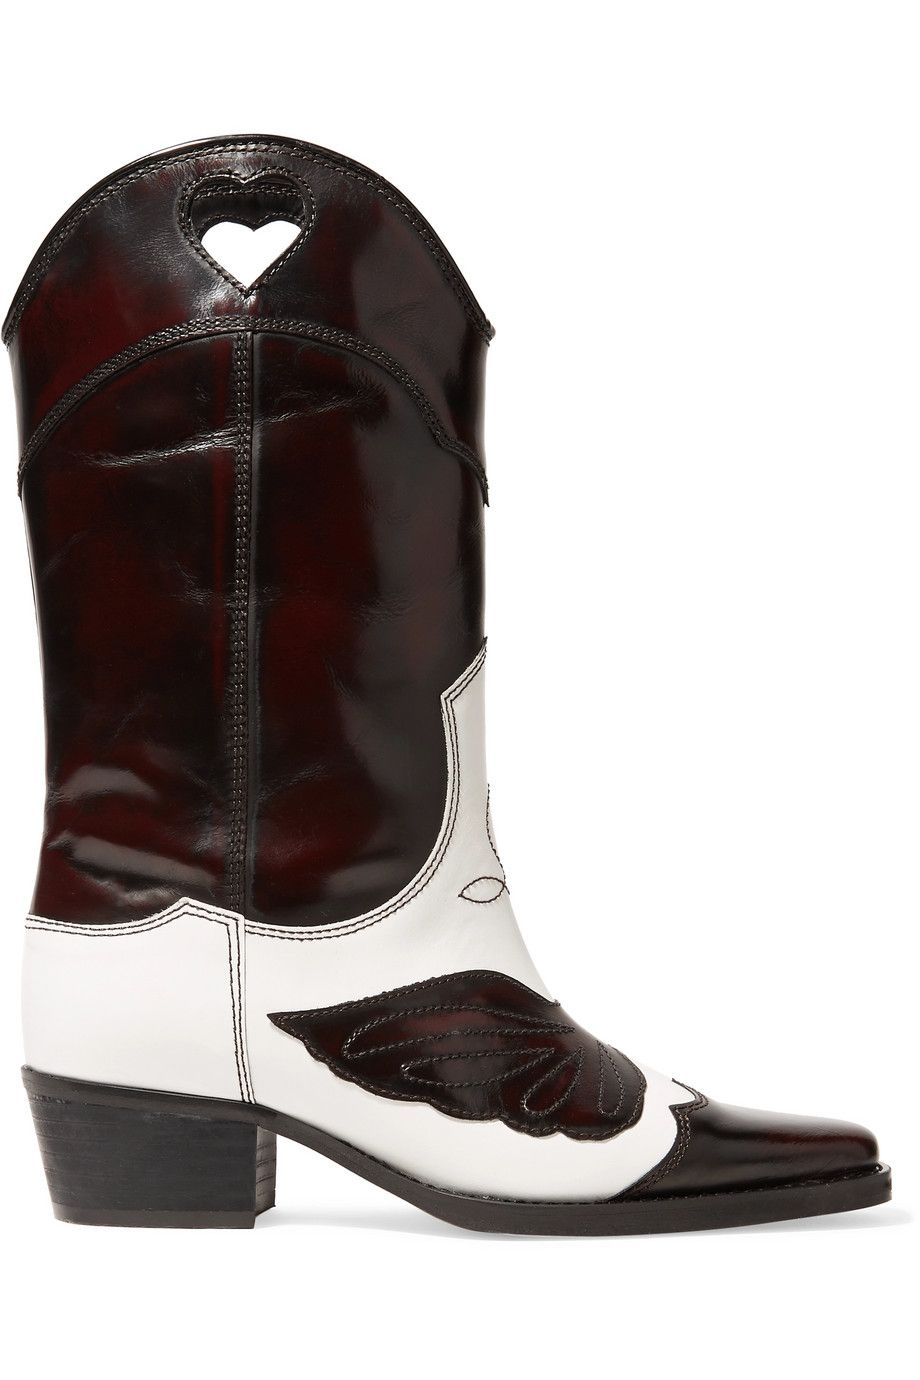 Two-Tone Leather Bowboy Boots